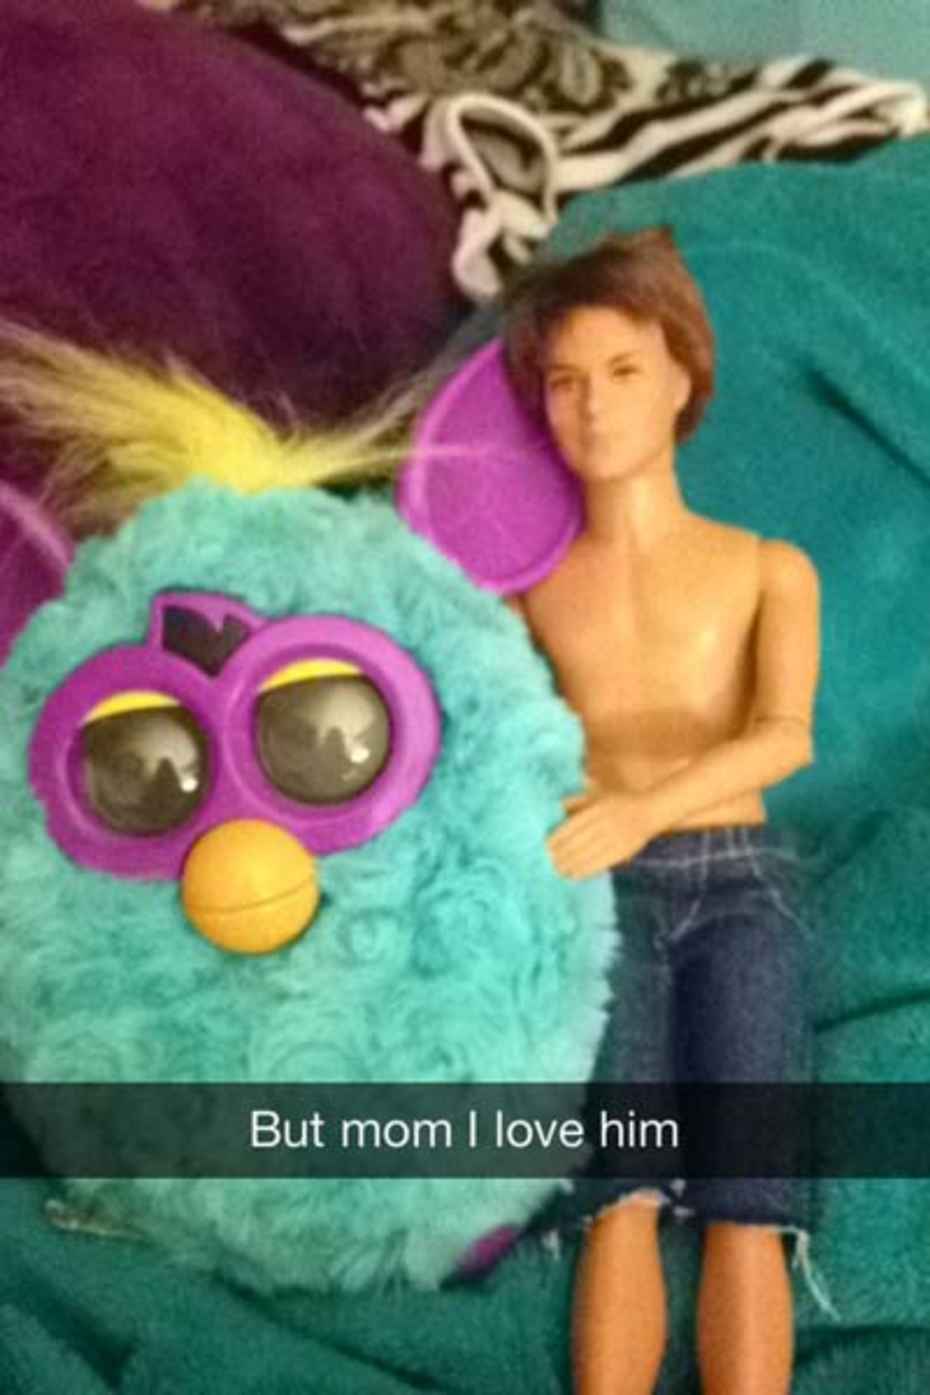 snapchat cringe funny snaps to send to a guy - But mom I love him